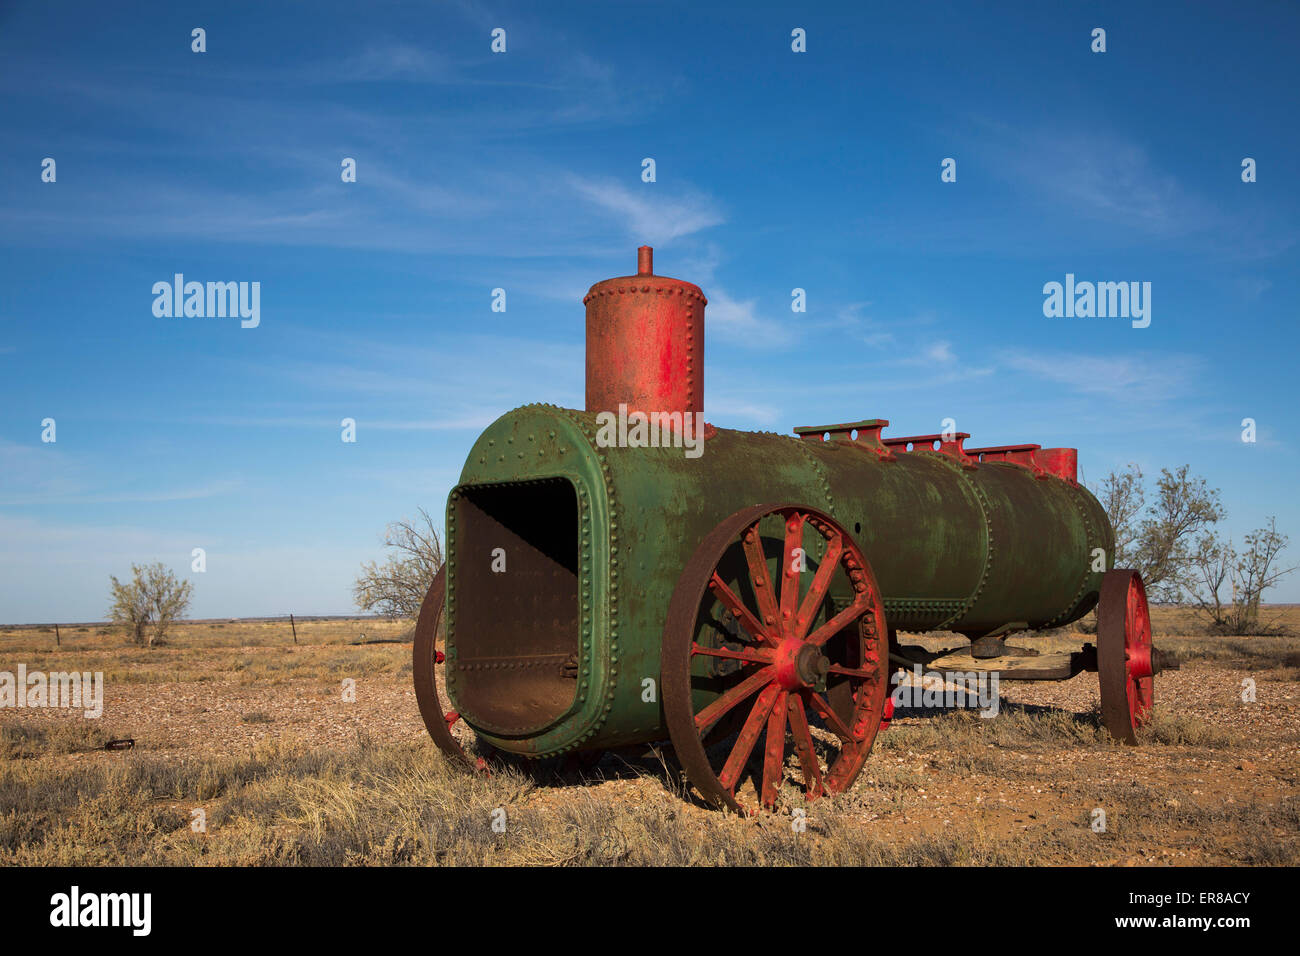 Abandoned steam engine on field against blue sky Stock Photo